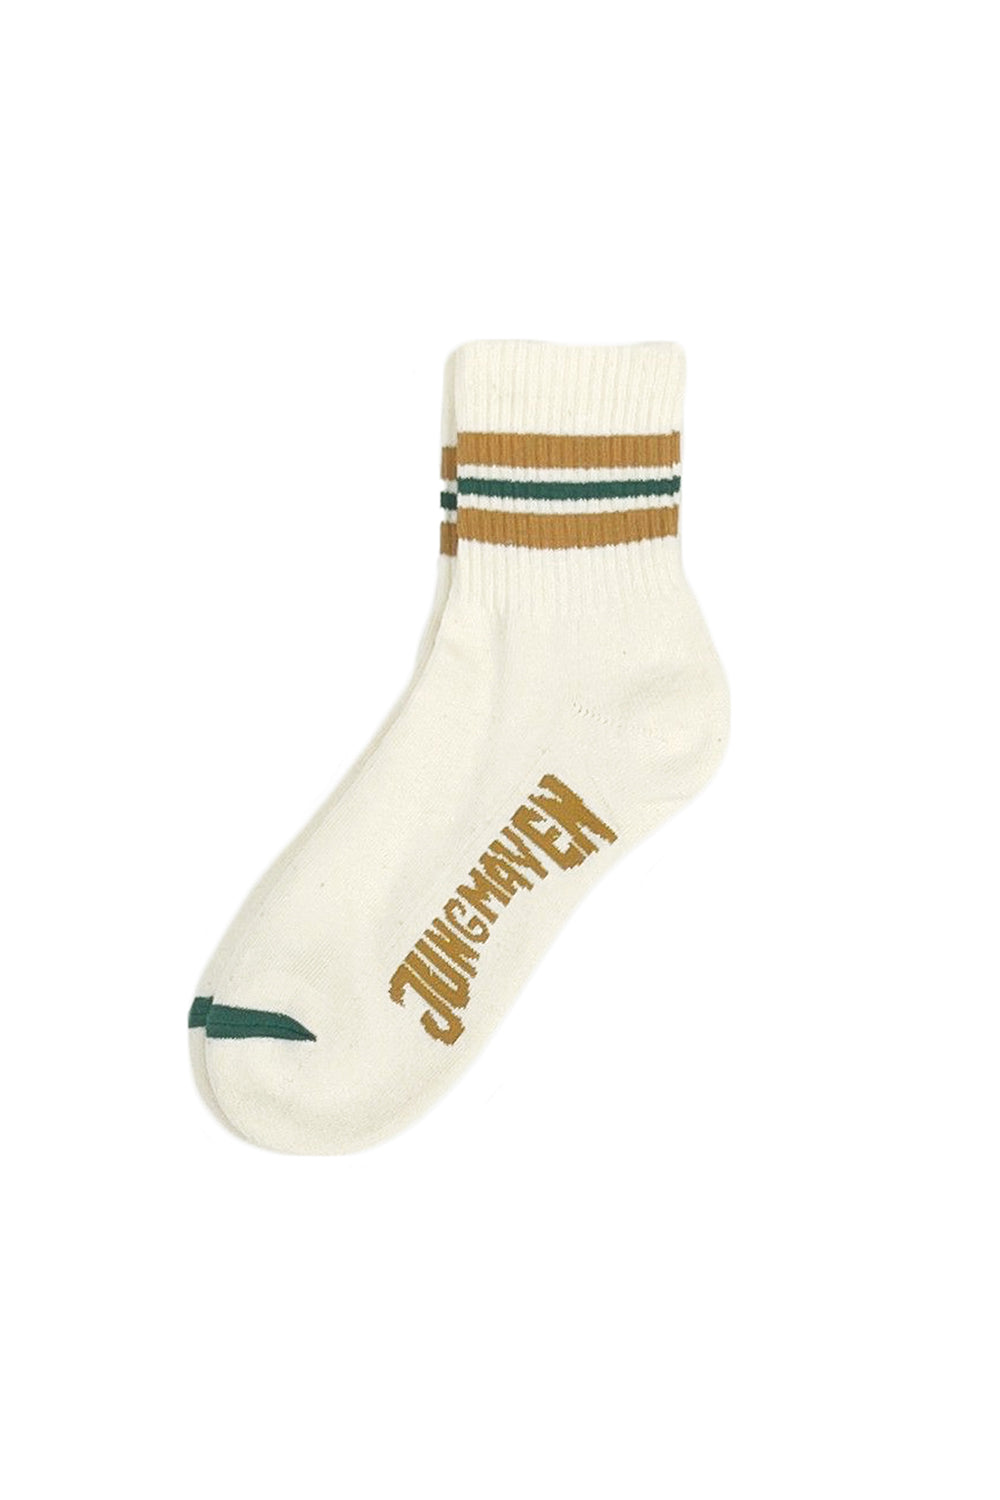 Town and Country Ankle Socks | Jungmaven Hemp Clothing & Accessories / Color: Ivy Green/Mango Mojito